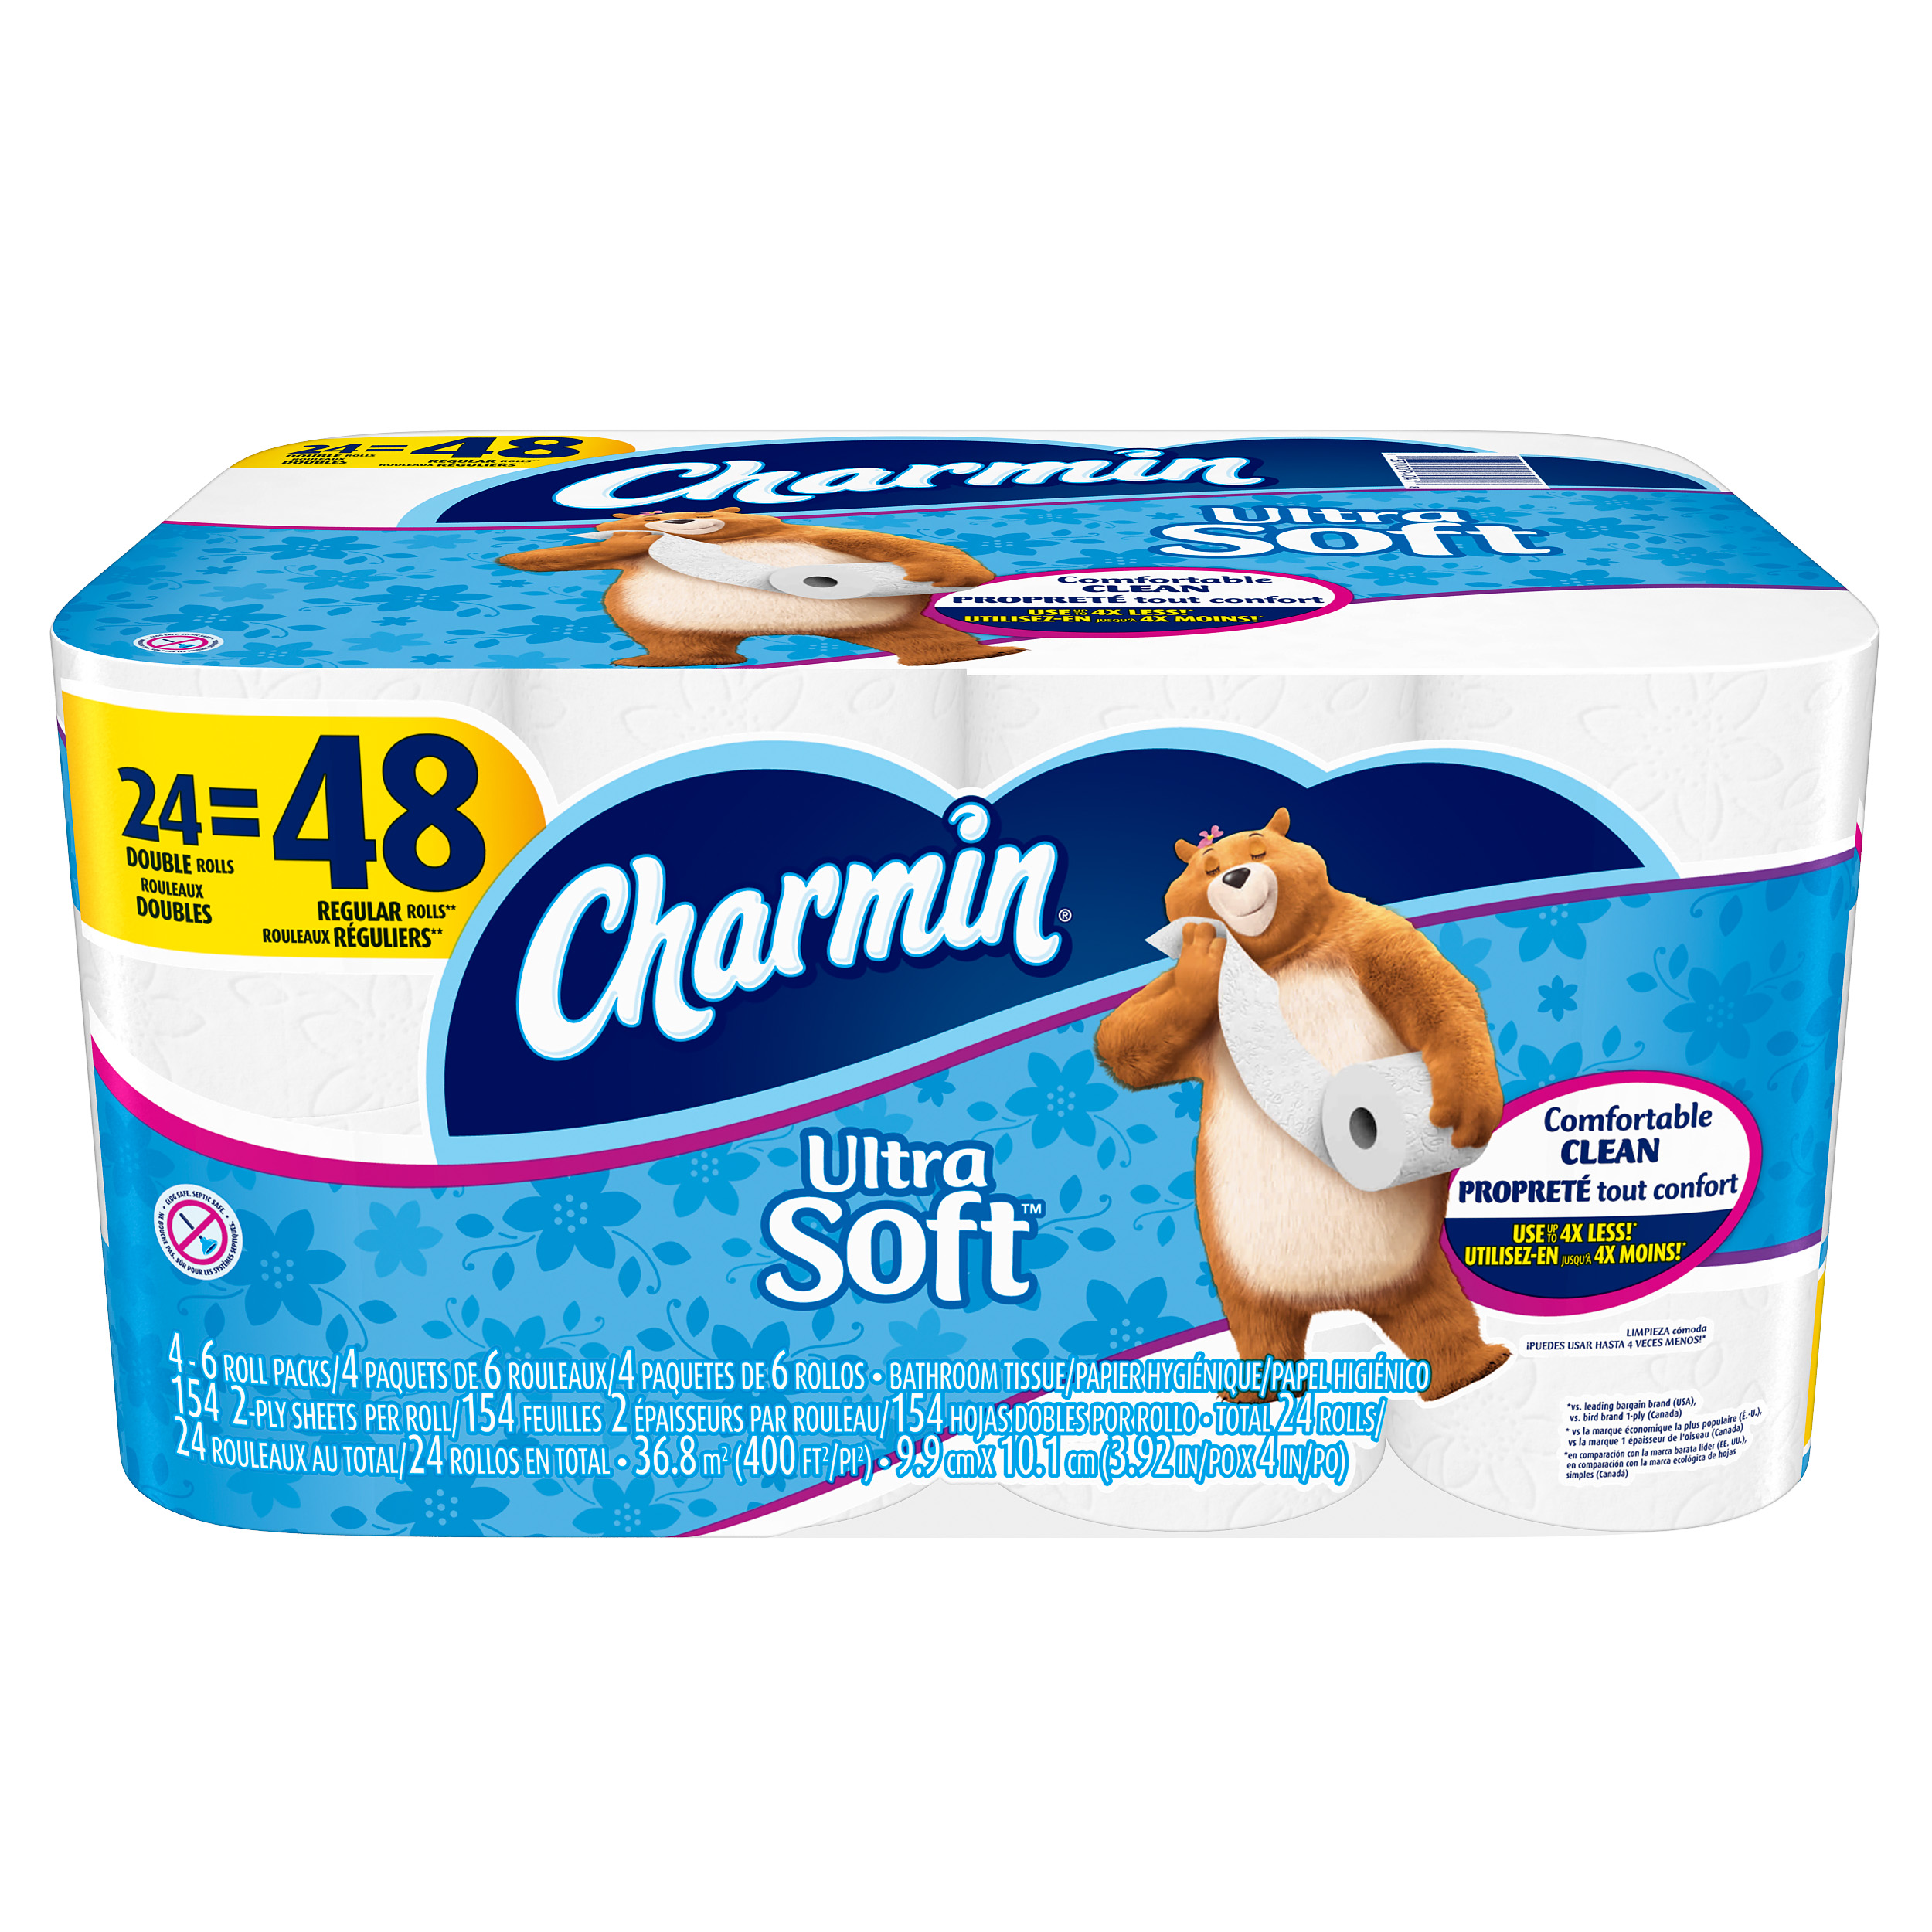 Charmin Ultra Soft Toilet Paper 24 Double Rolls - image 1 of 8